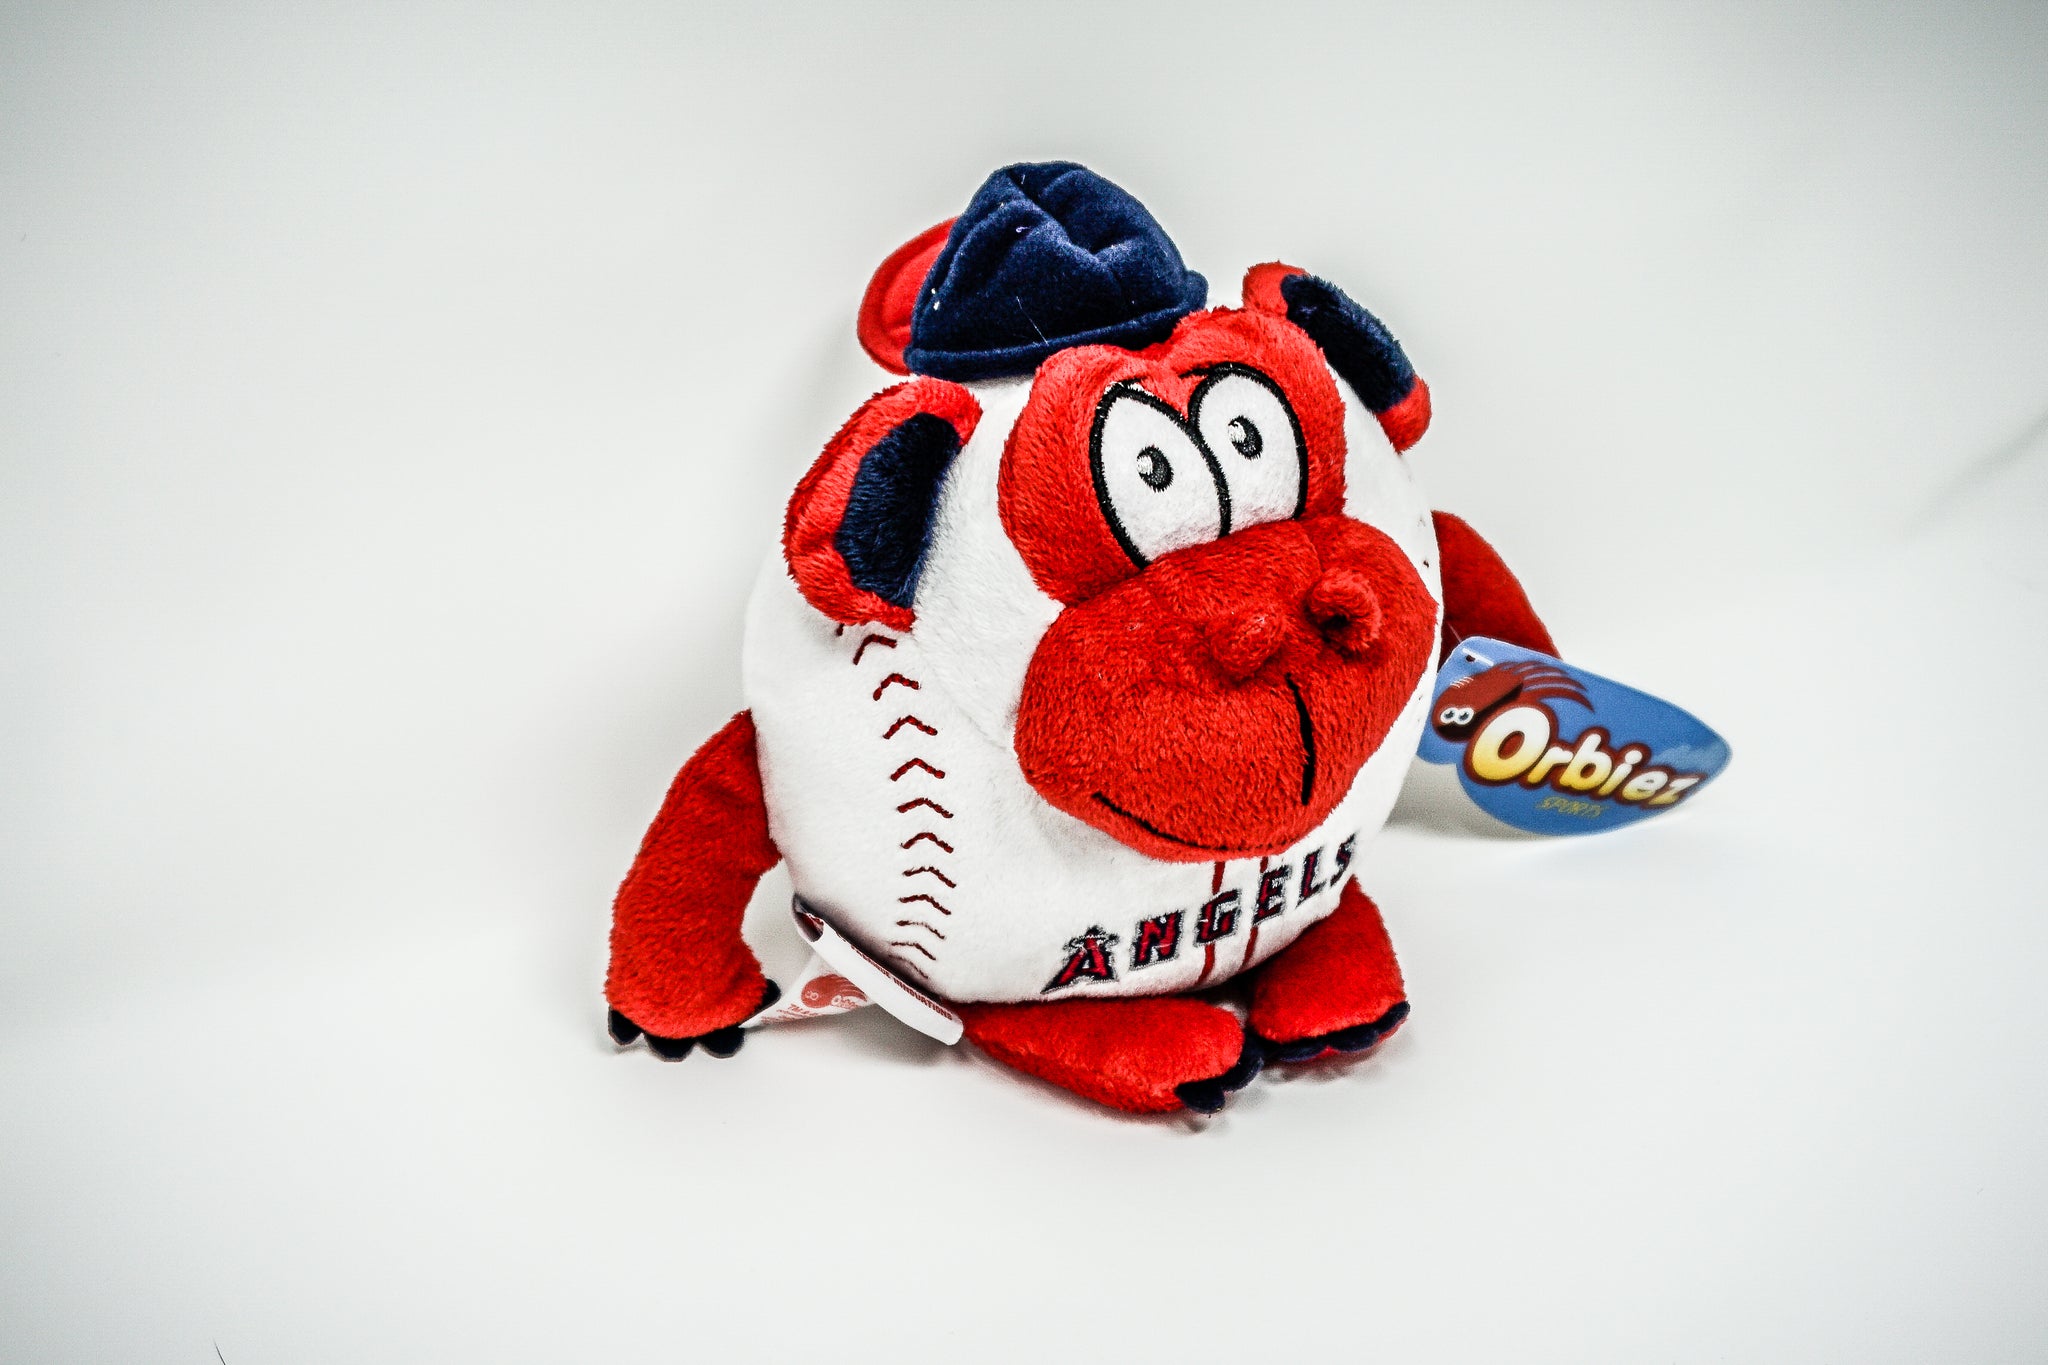 Los Angeles Angels rally monkey stuffed animal during game vs